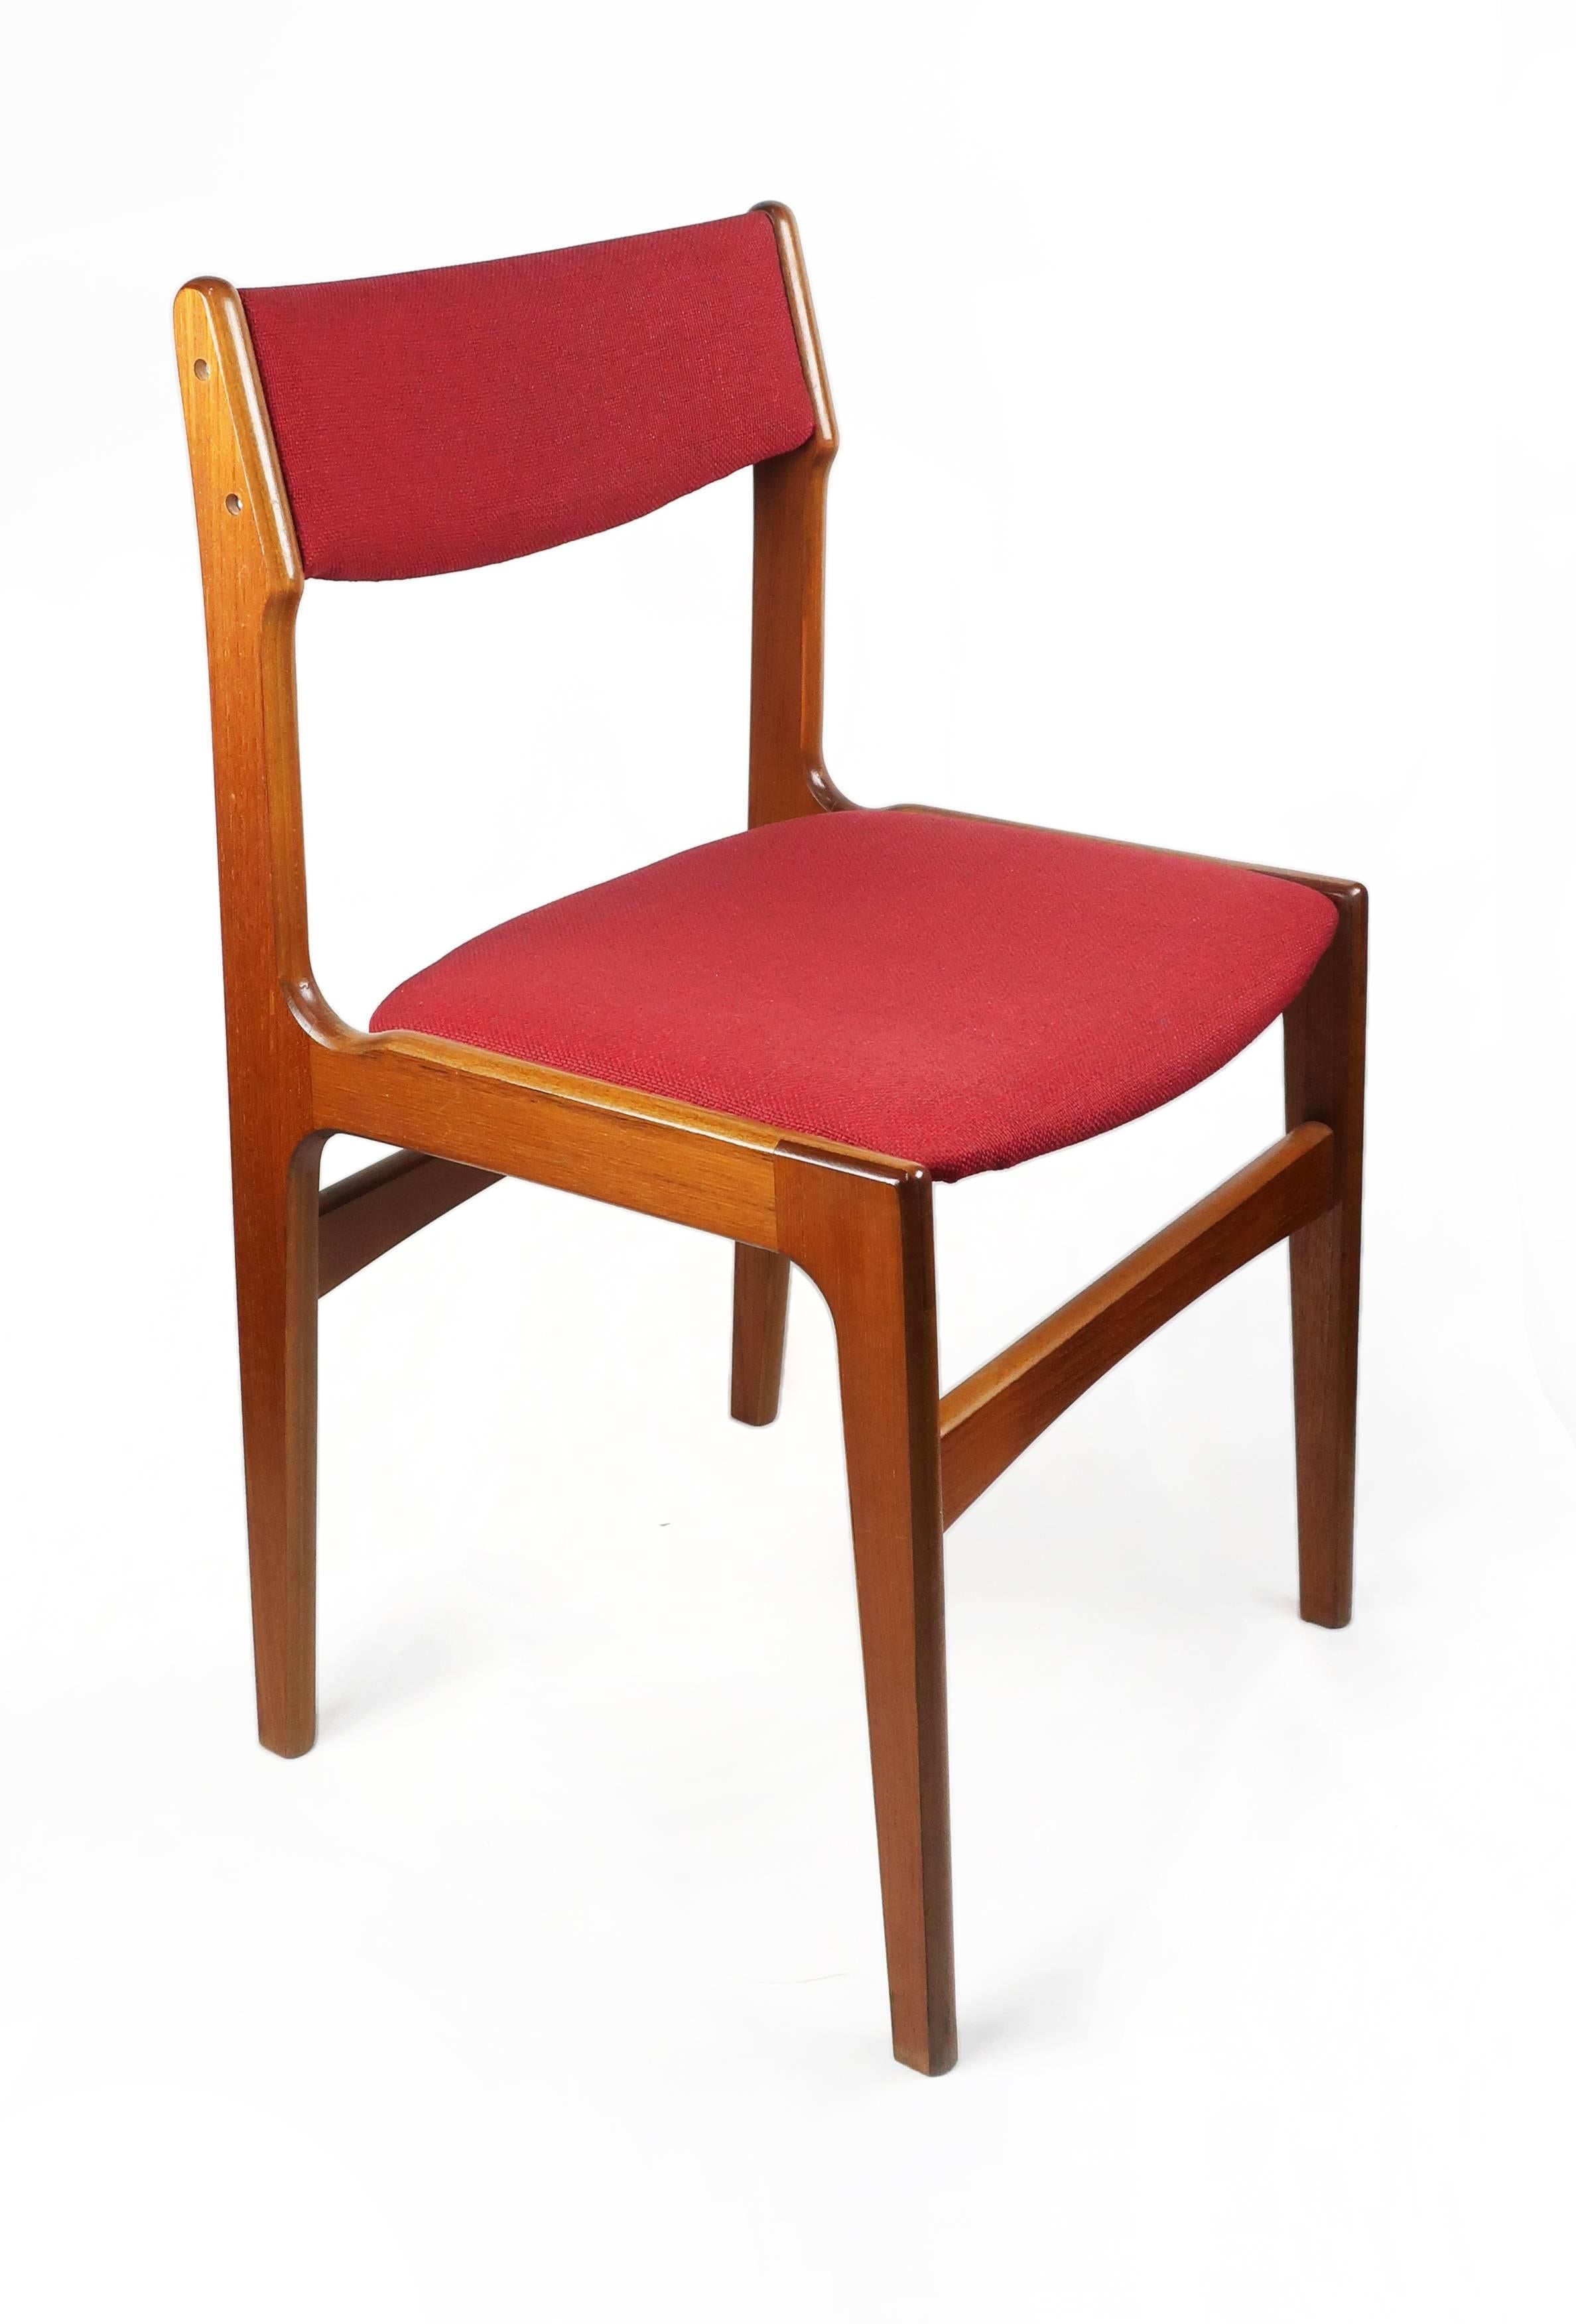 A stunning pair of Danish Modern teak dining chairs by Erik Buch for Anderstrup Mobelfabrik. Professionally reupholstered with a rich red vintage upholstery and new seat/back foam. The teak finger joint frames are in excellent shape and have been